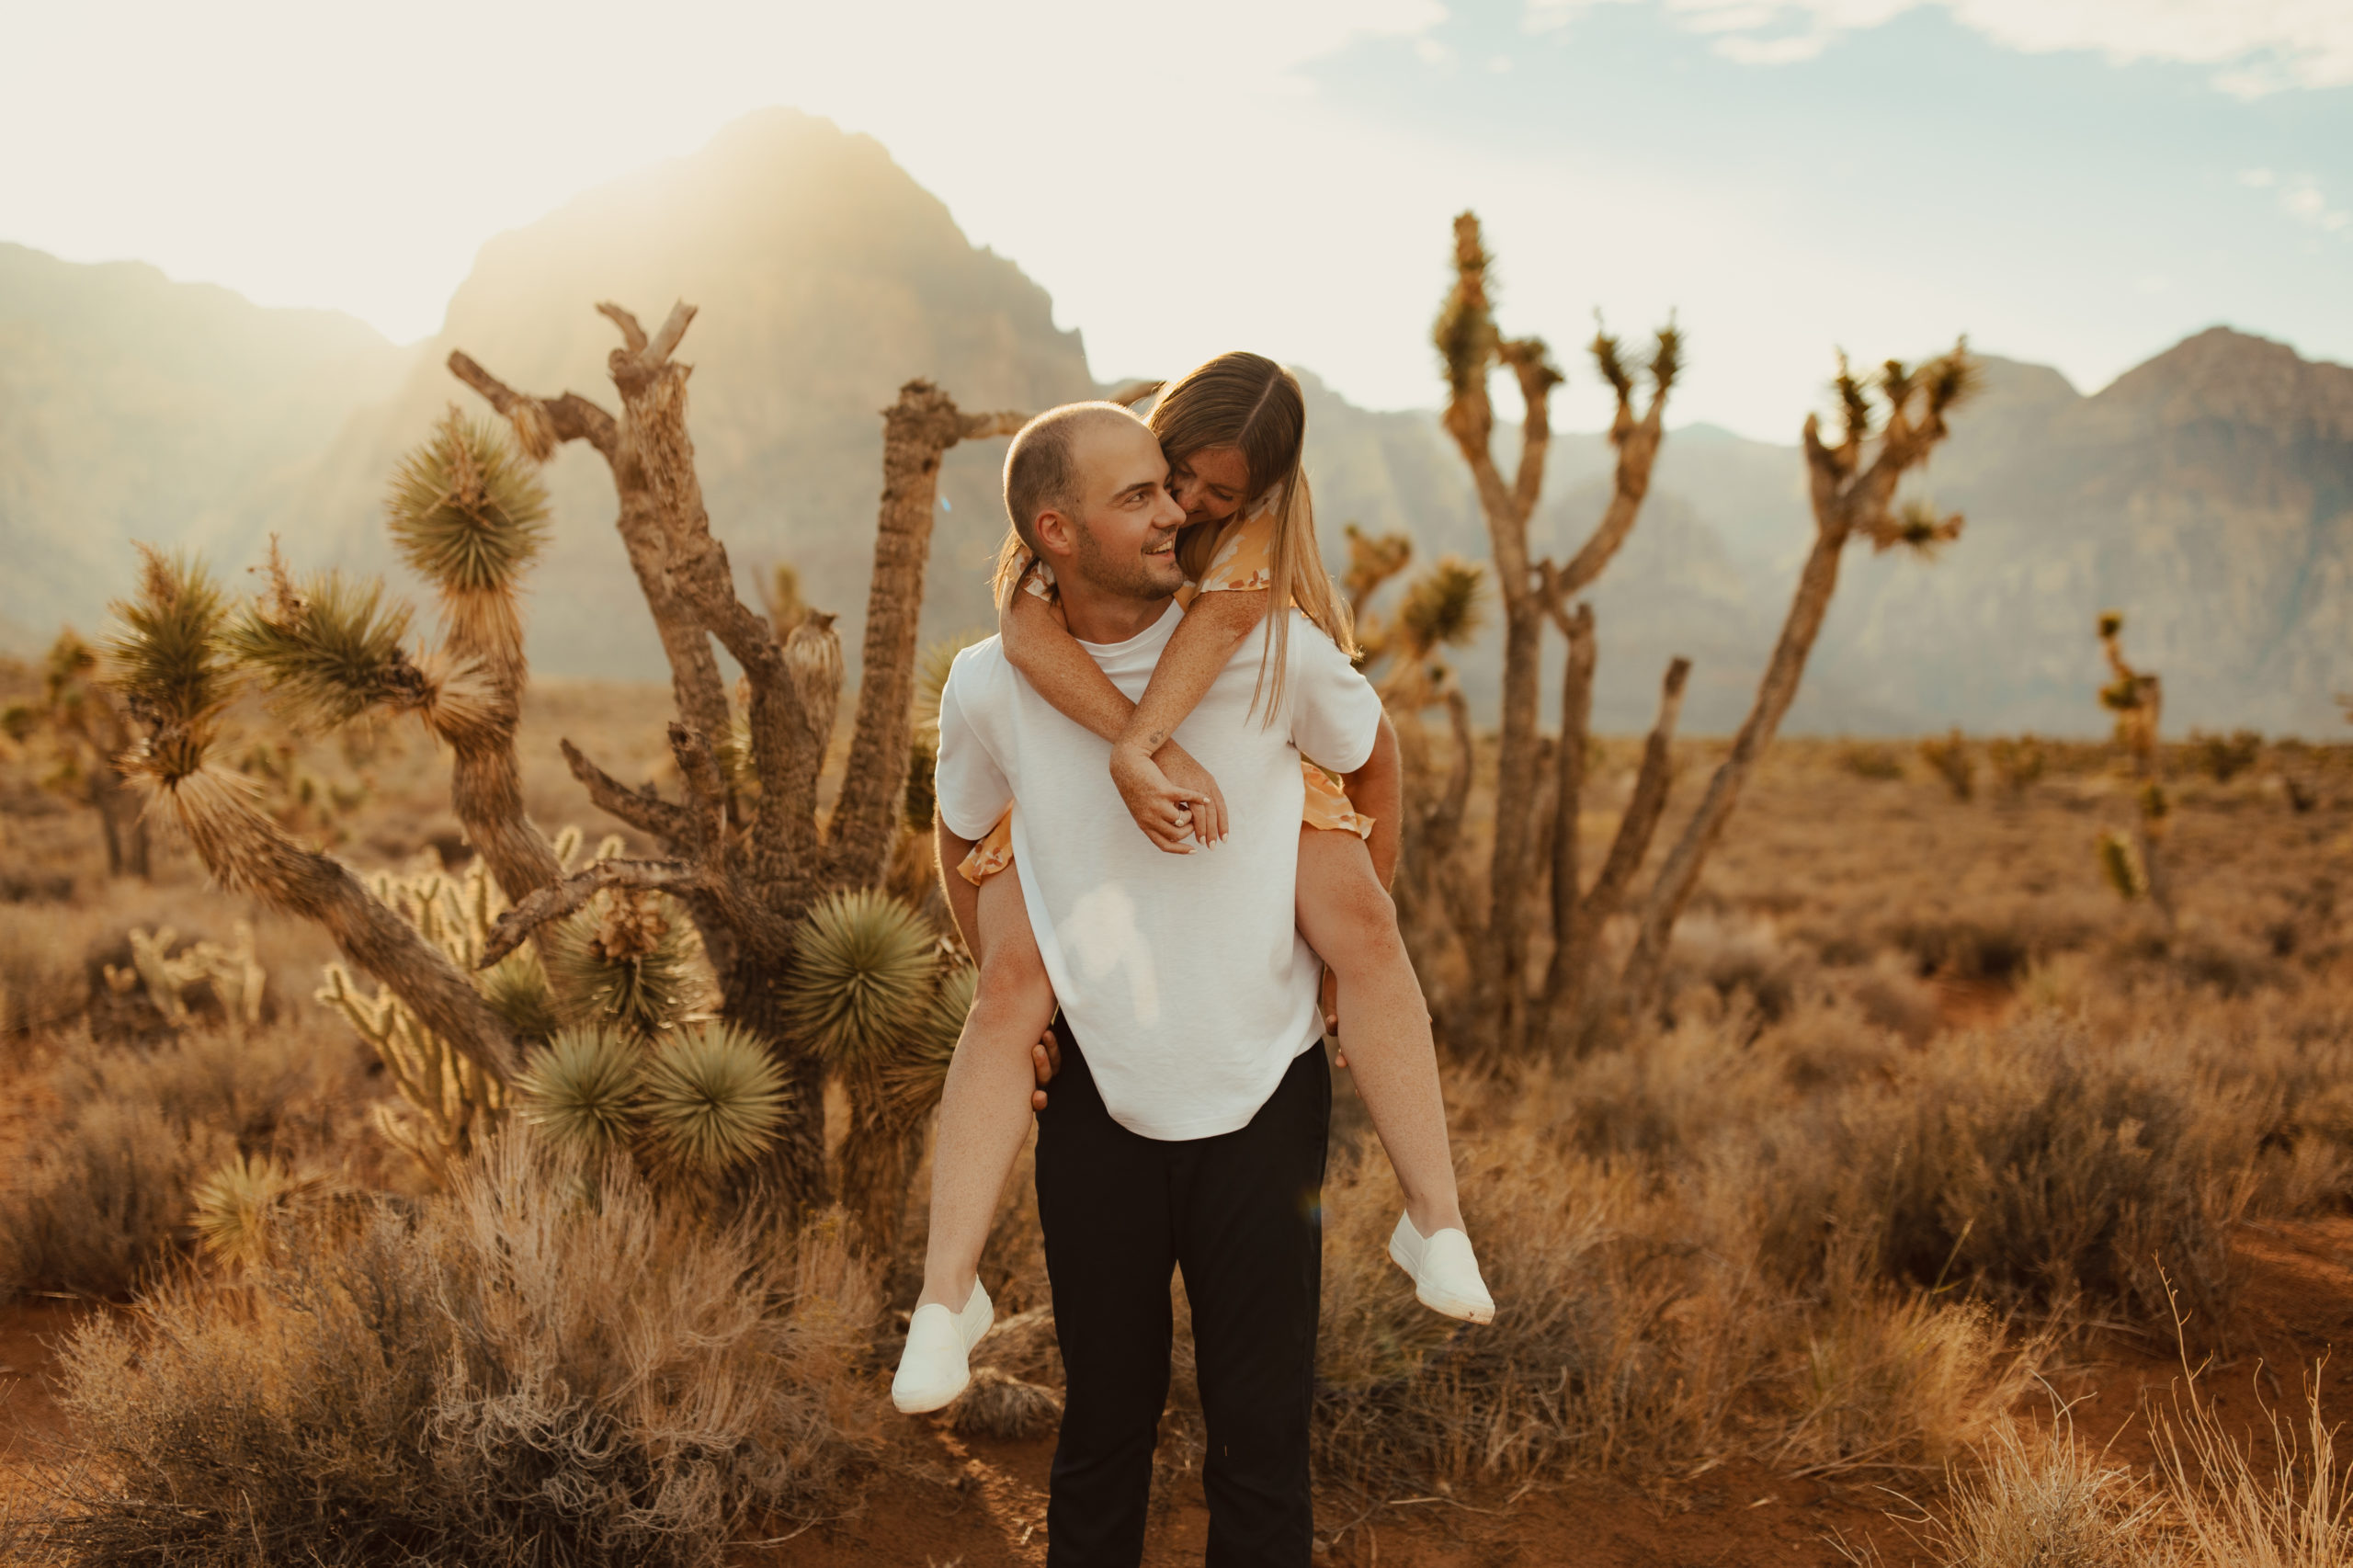 fiance giving his girl friend a piggy back ride in the desert